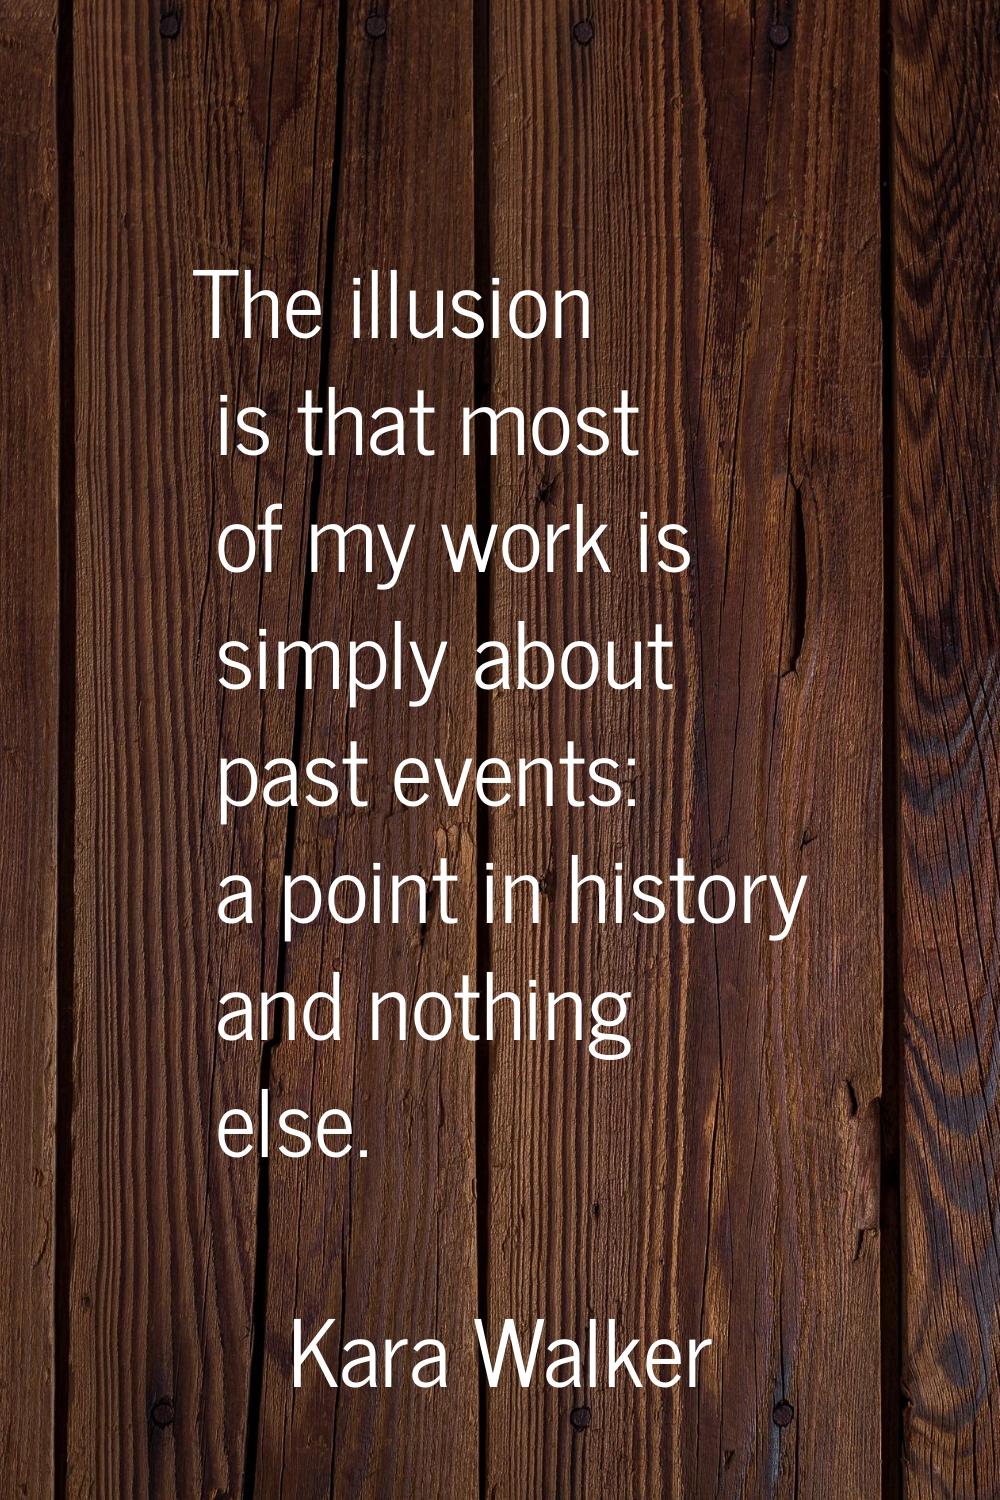 The illusion is that most of my work is simply about past events: a point in history and nothing el